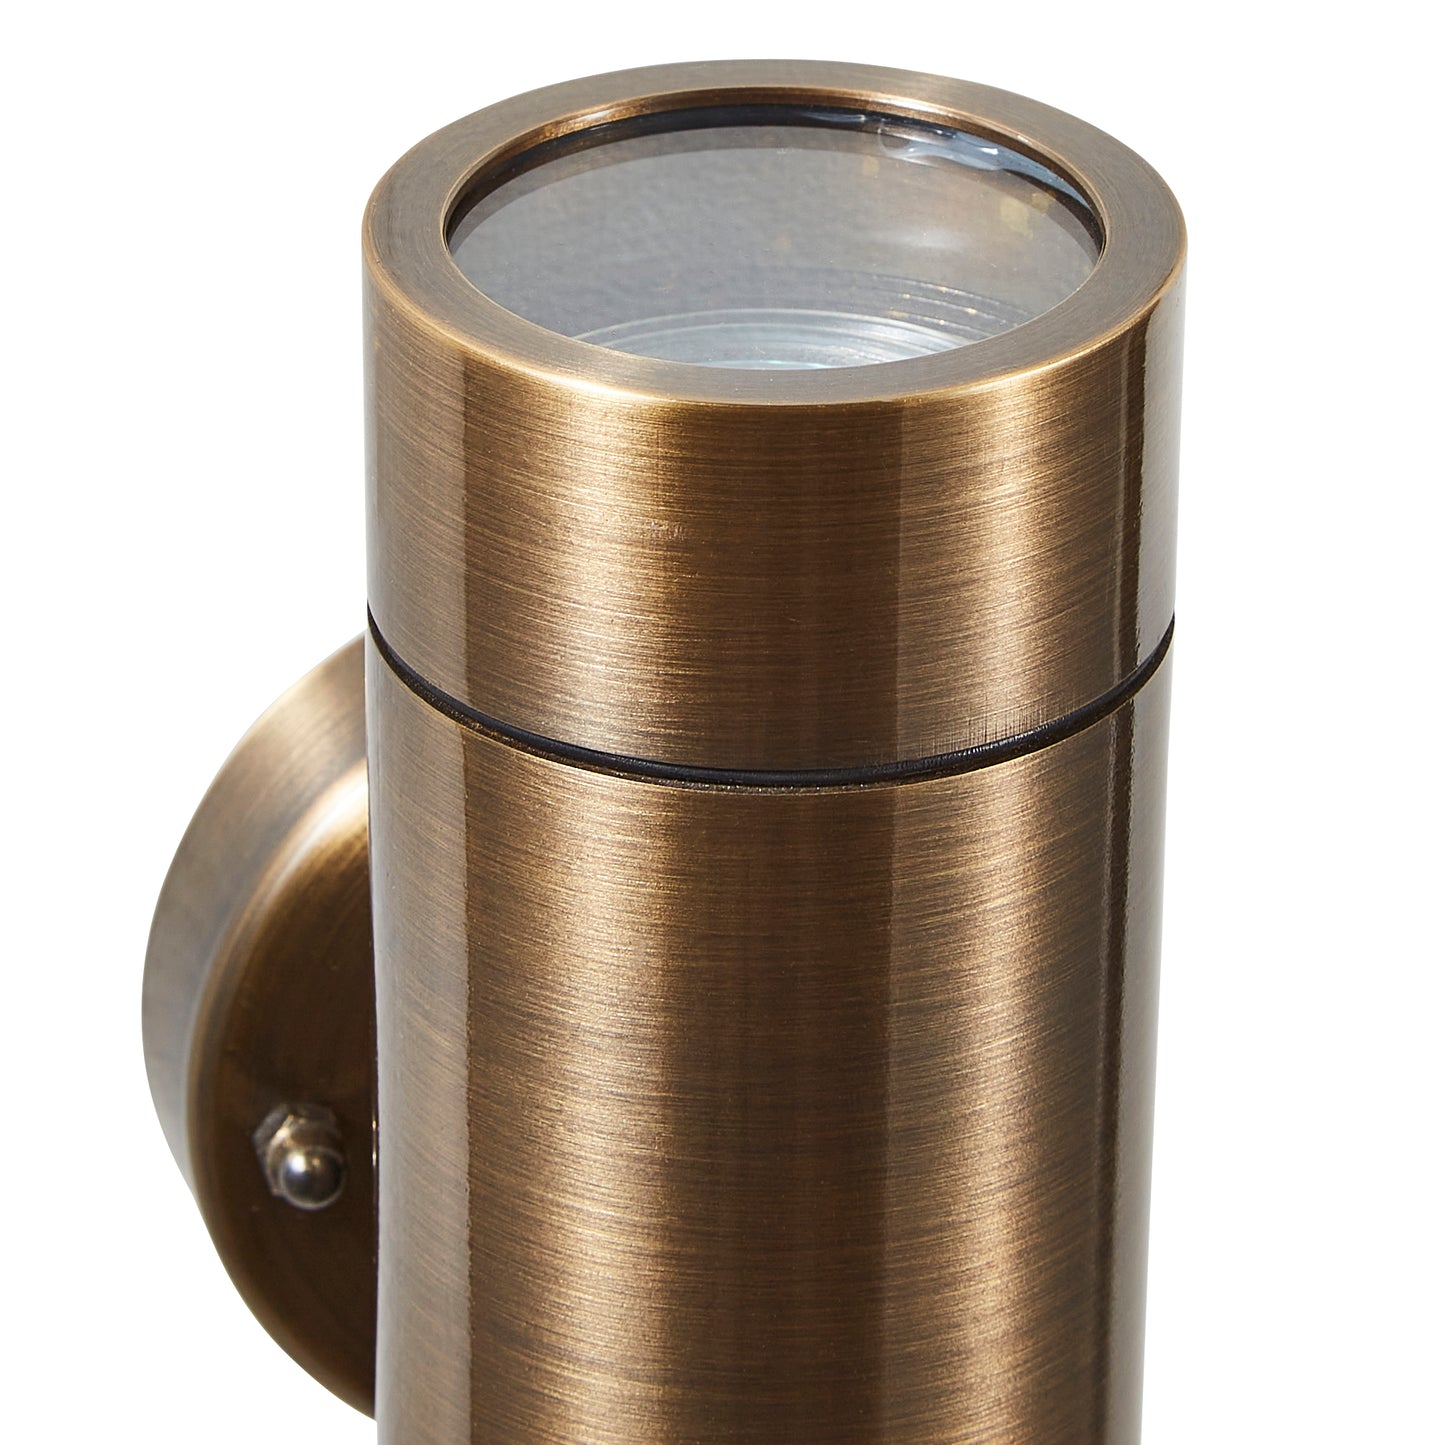 Our Noah bronze outdoor up and down wall mounted cylinder outdoor light would look perfect in a modern or more traditional home design. Outside wall lights can provide atmospheric light in your garden, at the front door or on the terrace as well as a great security solution. It is designed for durability and longevity with its robust material producing a fully weatherproof and water-resistant light fitting. Use LED bulbs to make this light energy efficient and low cost to run.